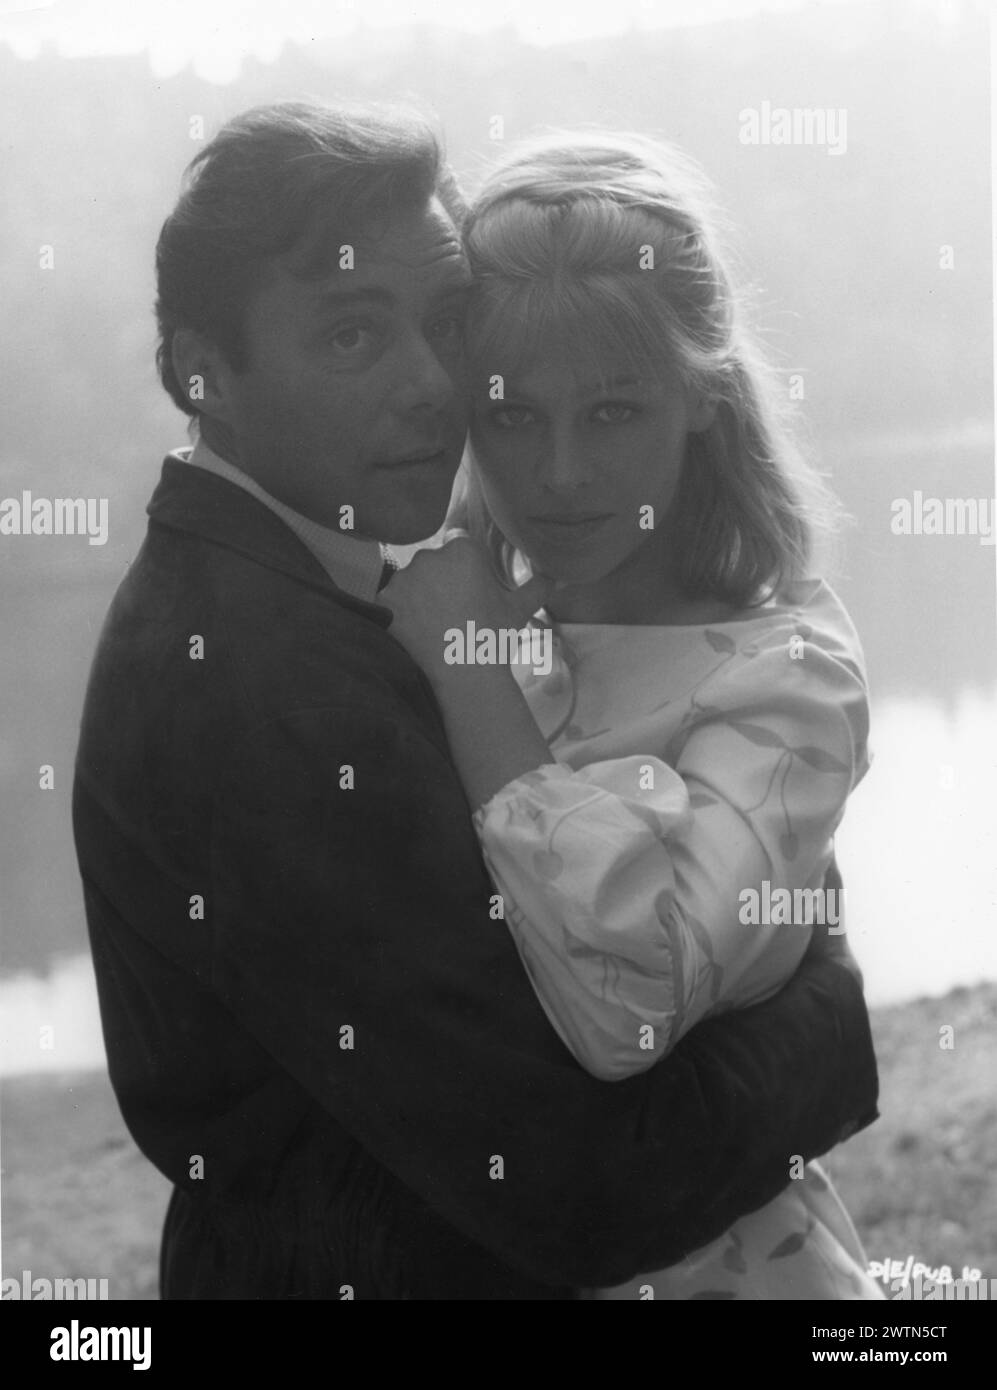 British Actress JULIE CHRISTIE and DIRK BOGARDE in a portrait from DARLING 1965  Director JOHN SCHLESINGER  Screenplay FREDERIC RAPHAEL Costume Design JULIE HARRIS Music JOHN DANKWORTH Vic-Appia Films / Anglo Amalgamated Stock Photo